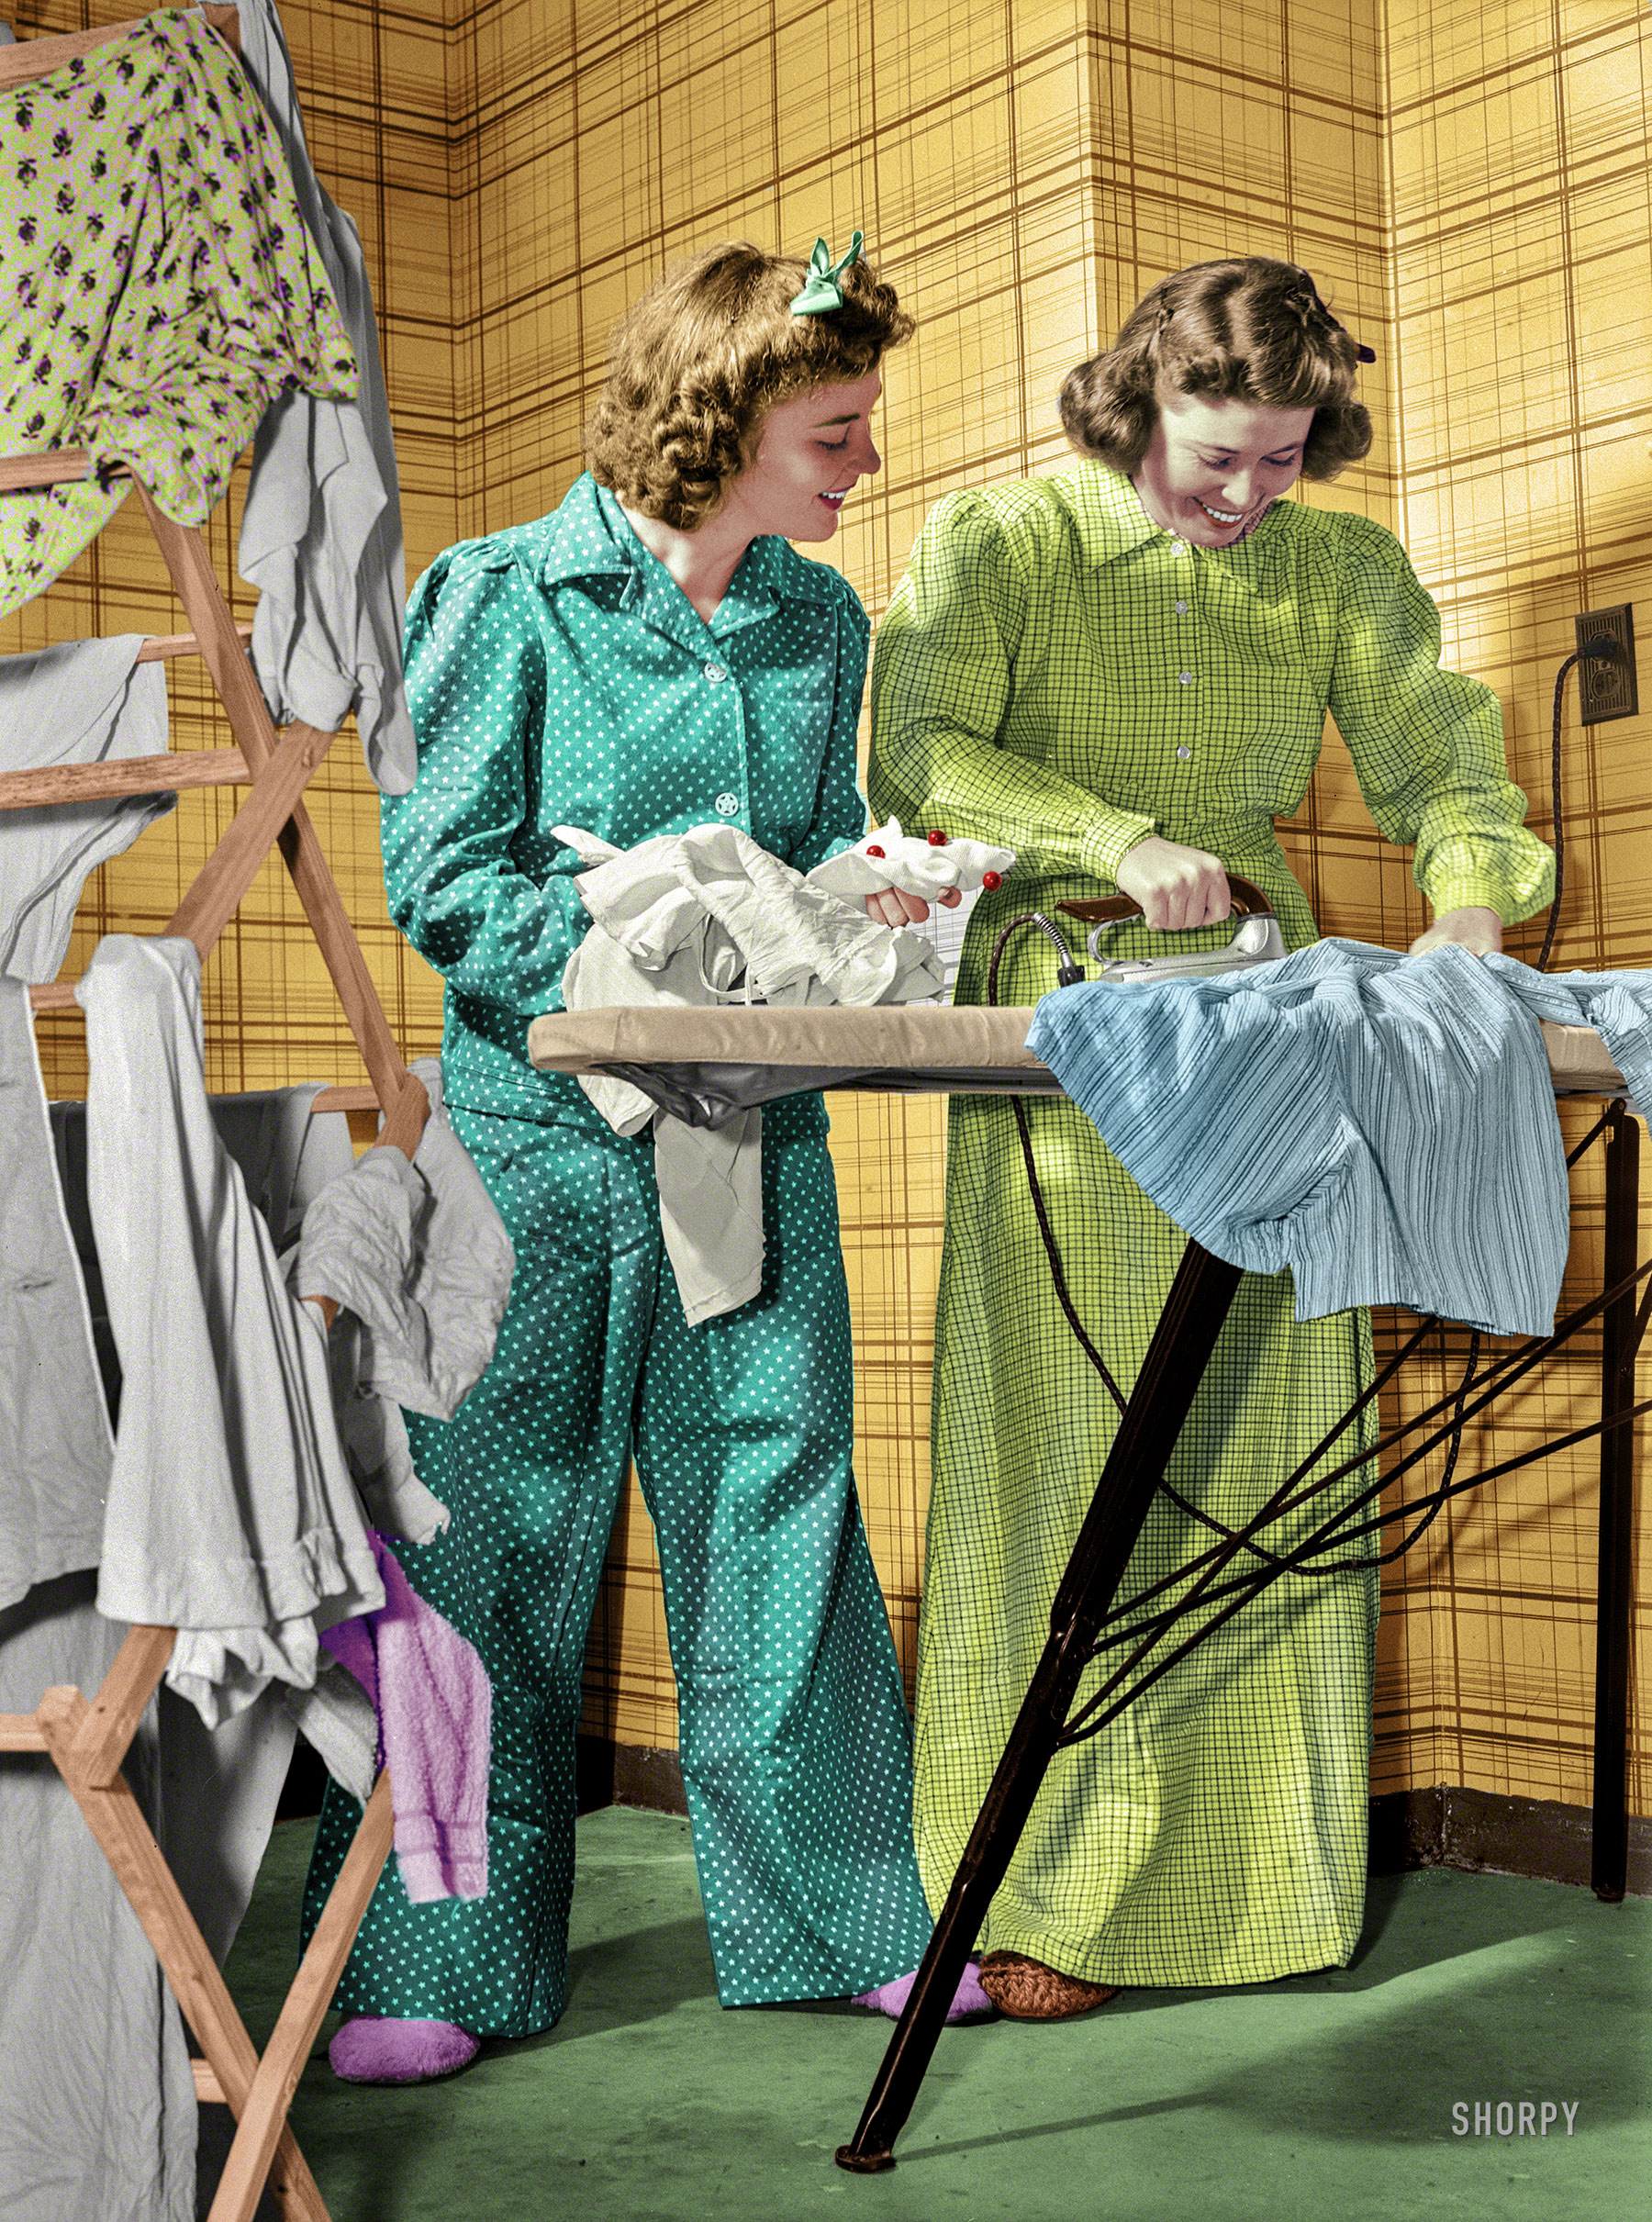 Colorized from this Shorpy original. I really liked this picture. Their smiles look just as good in color as they do on B&W. View full size.